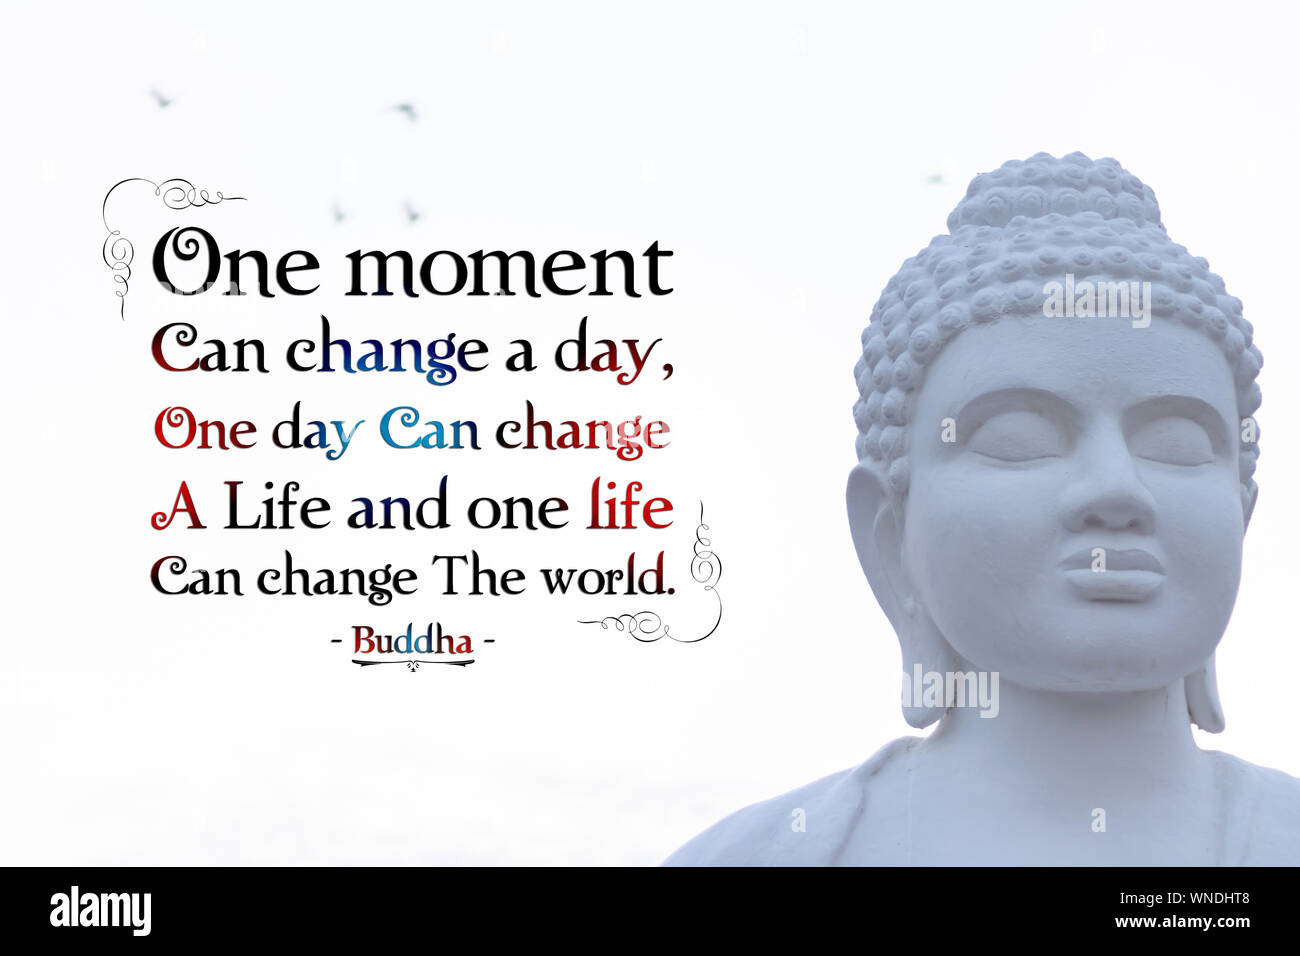 one moment can change a day one day can change a life and one life can change the world - buddha Stock Photo